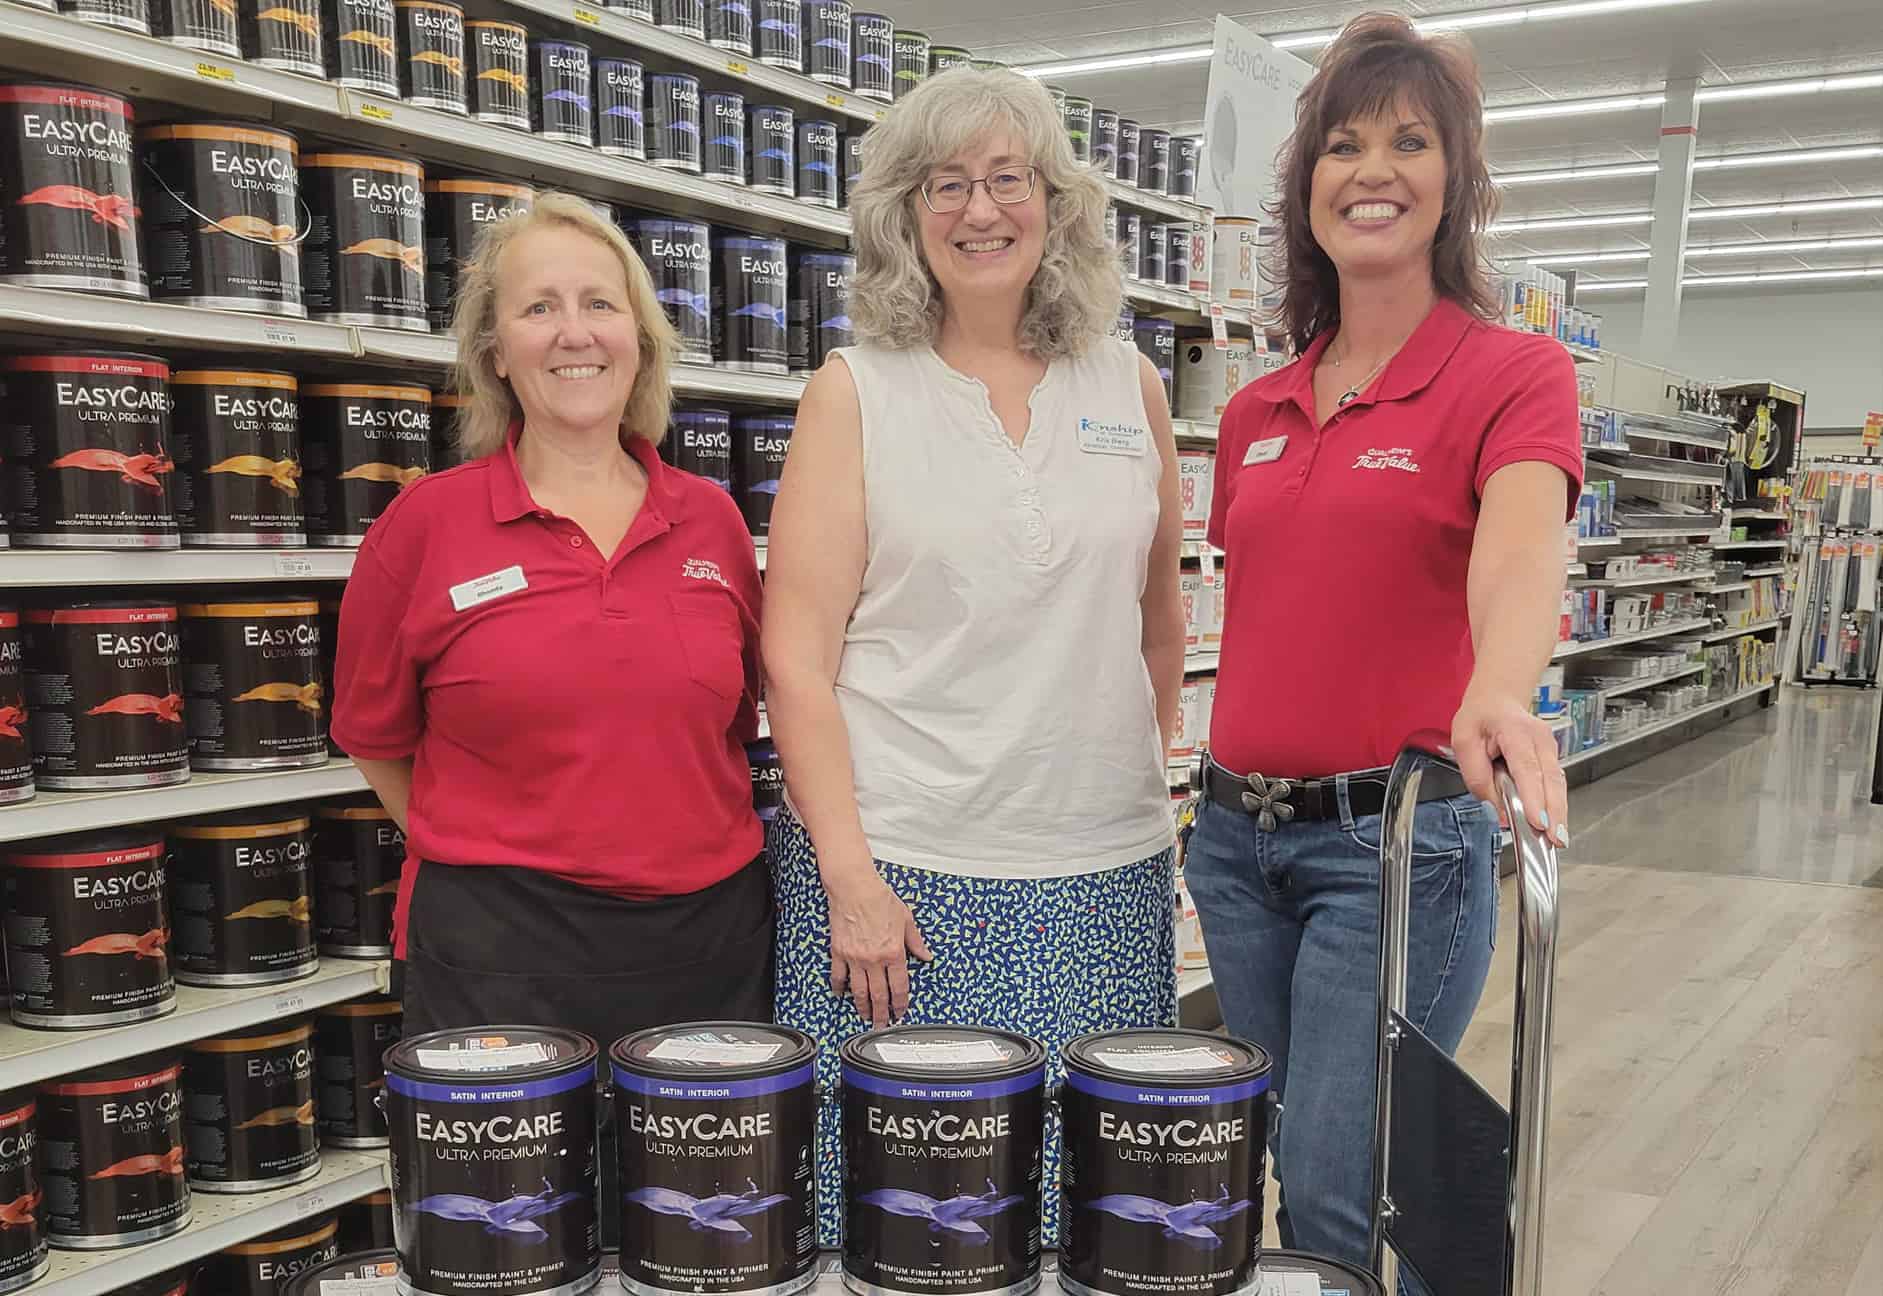 Qualheim’s True Value donates 15 gallons of paint to Kinship of Tomahawk